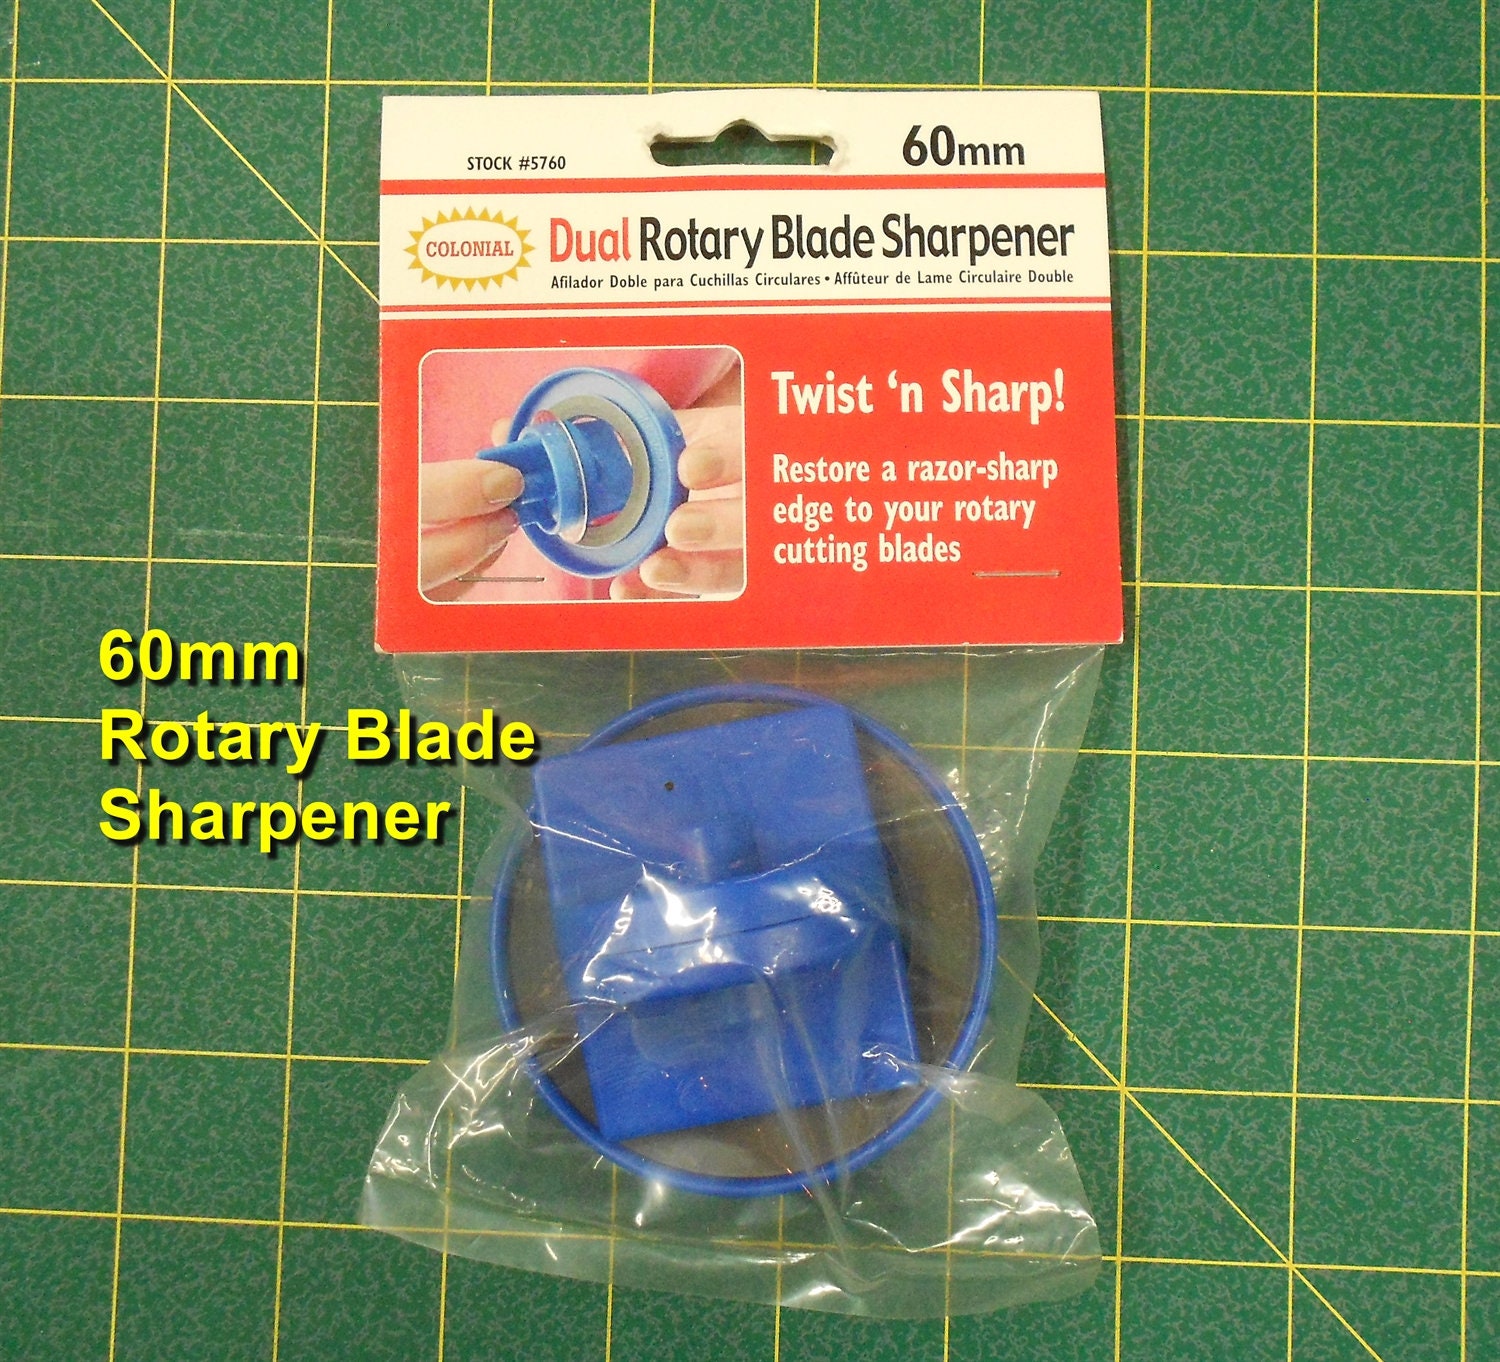 Colonial Needle Rotary Blade Sharpener for 28 mm Blades